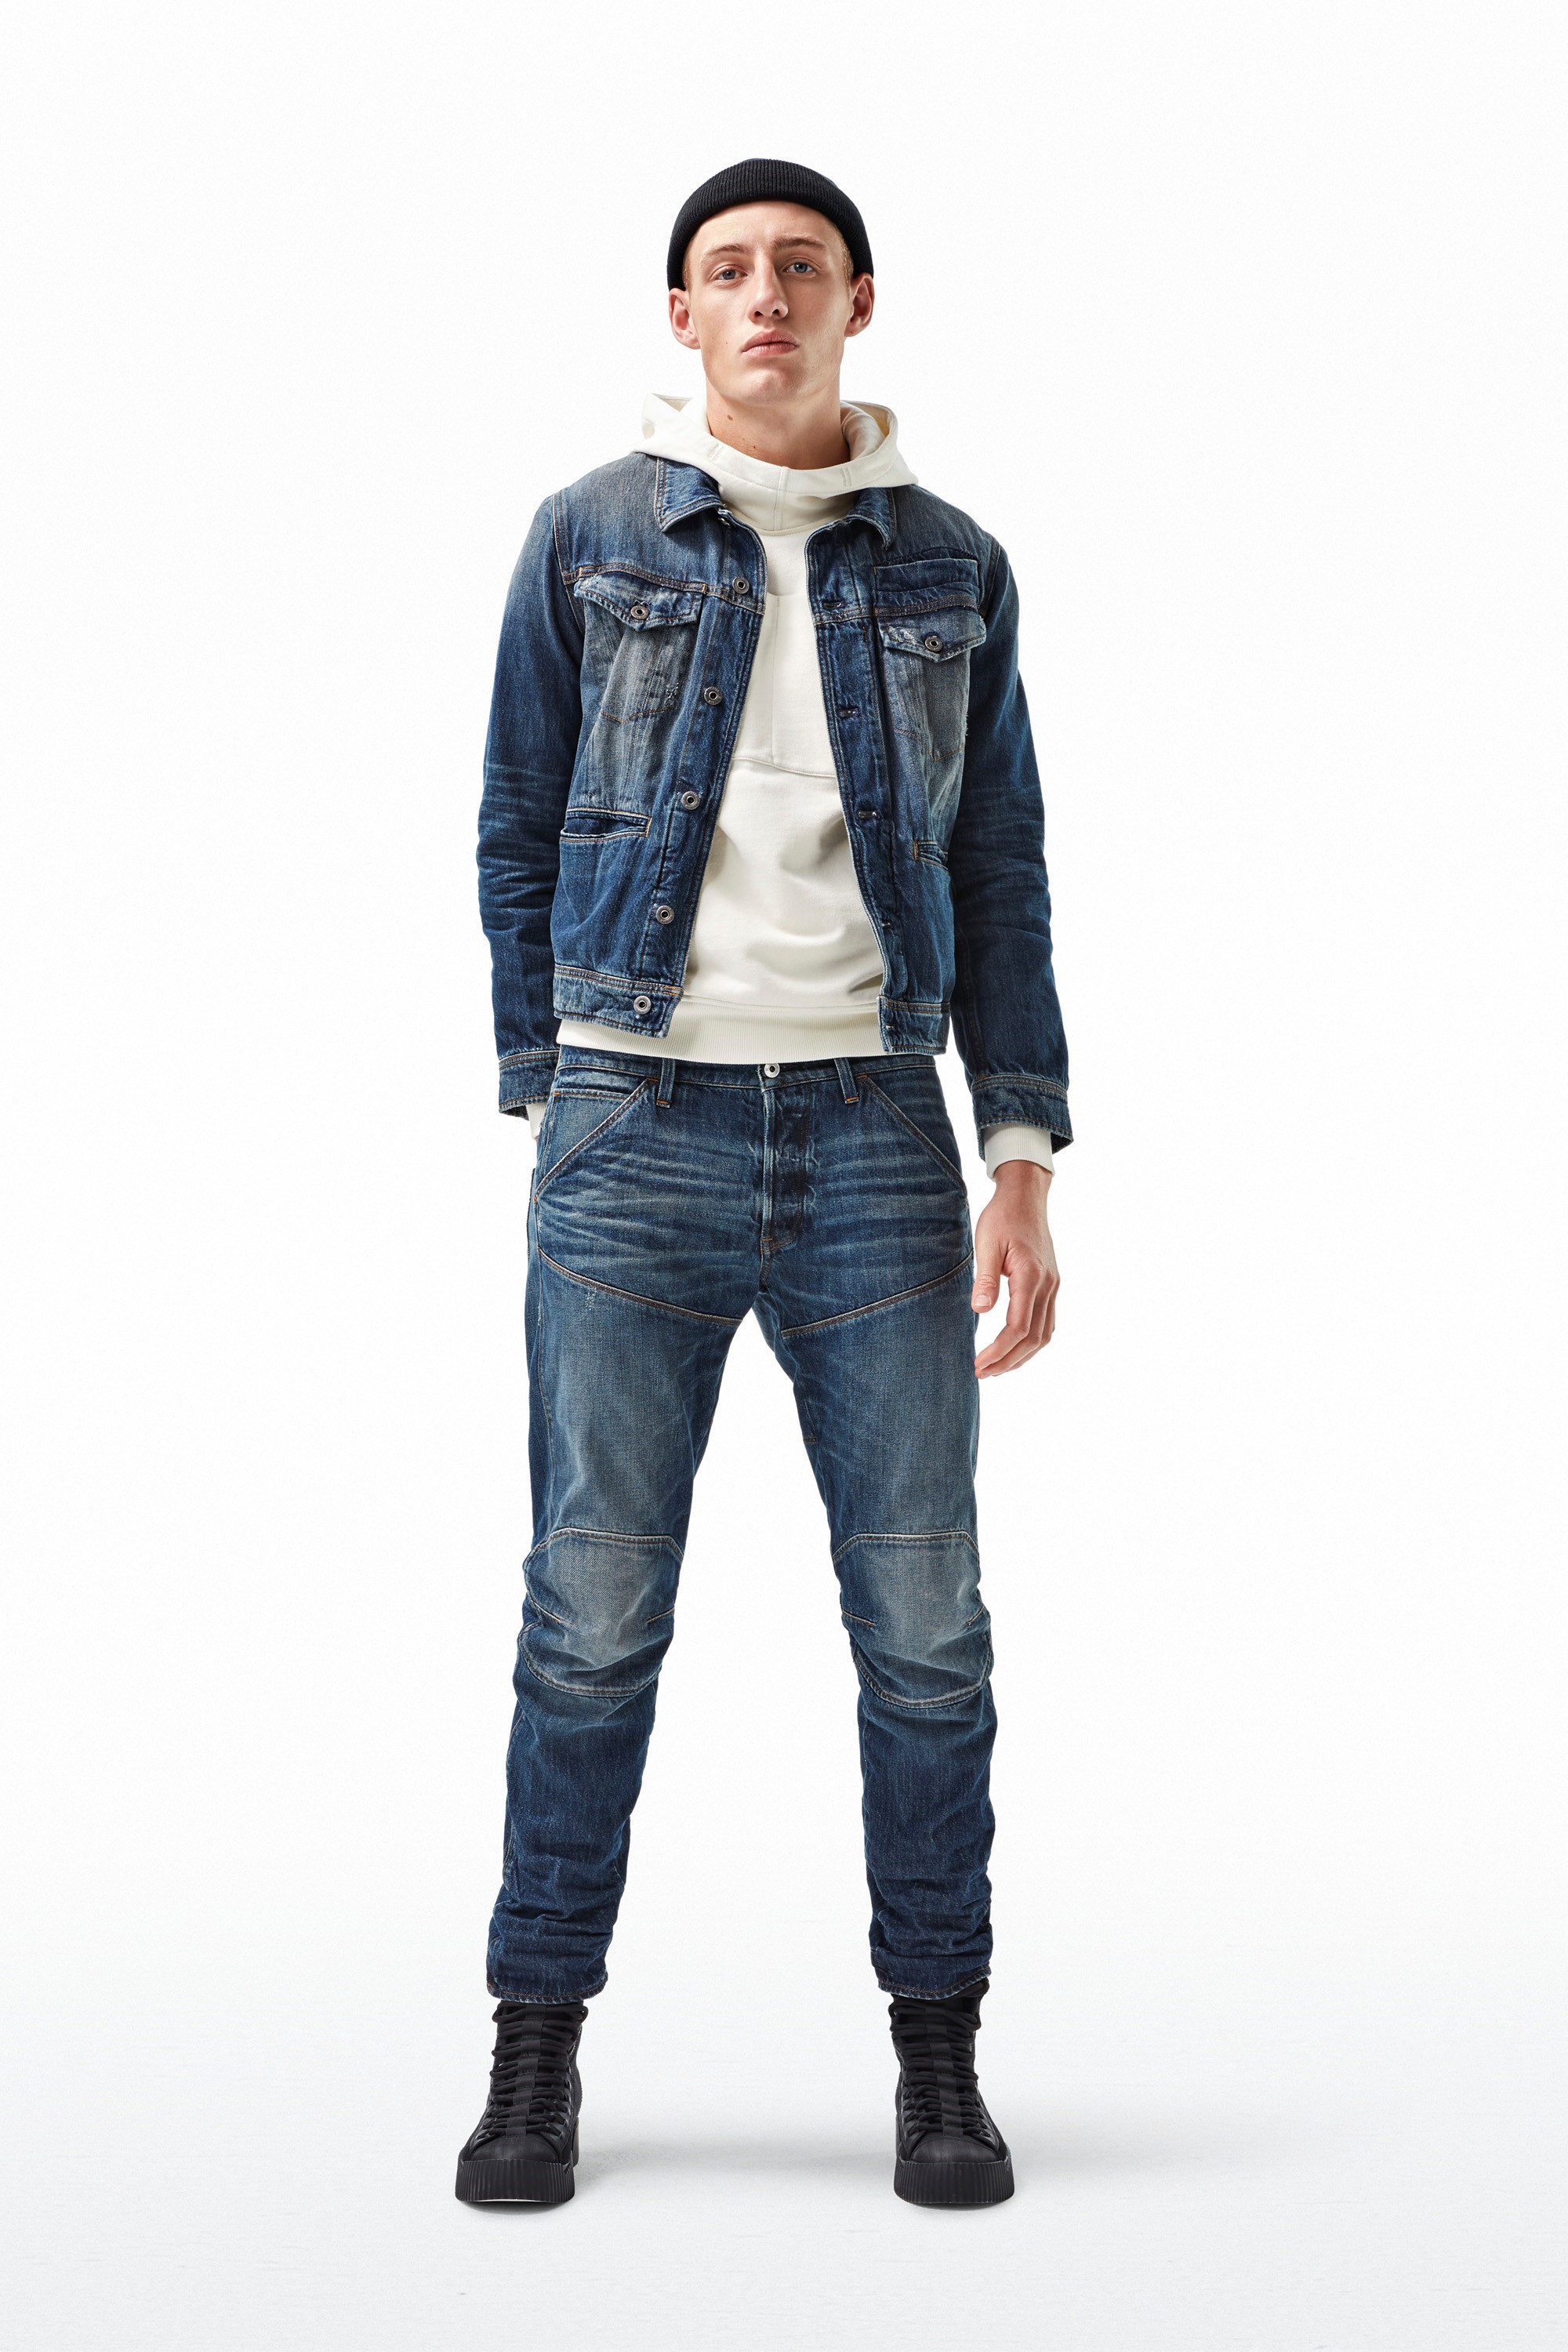 G-Star RAW just launched the world's most sustainable denim | Dazed